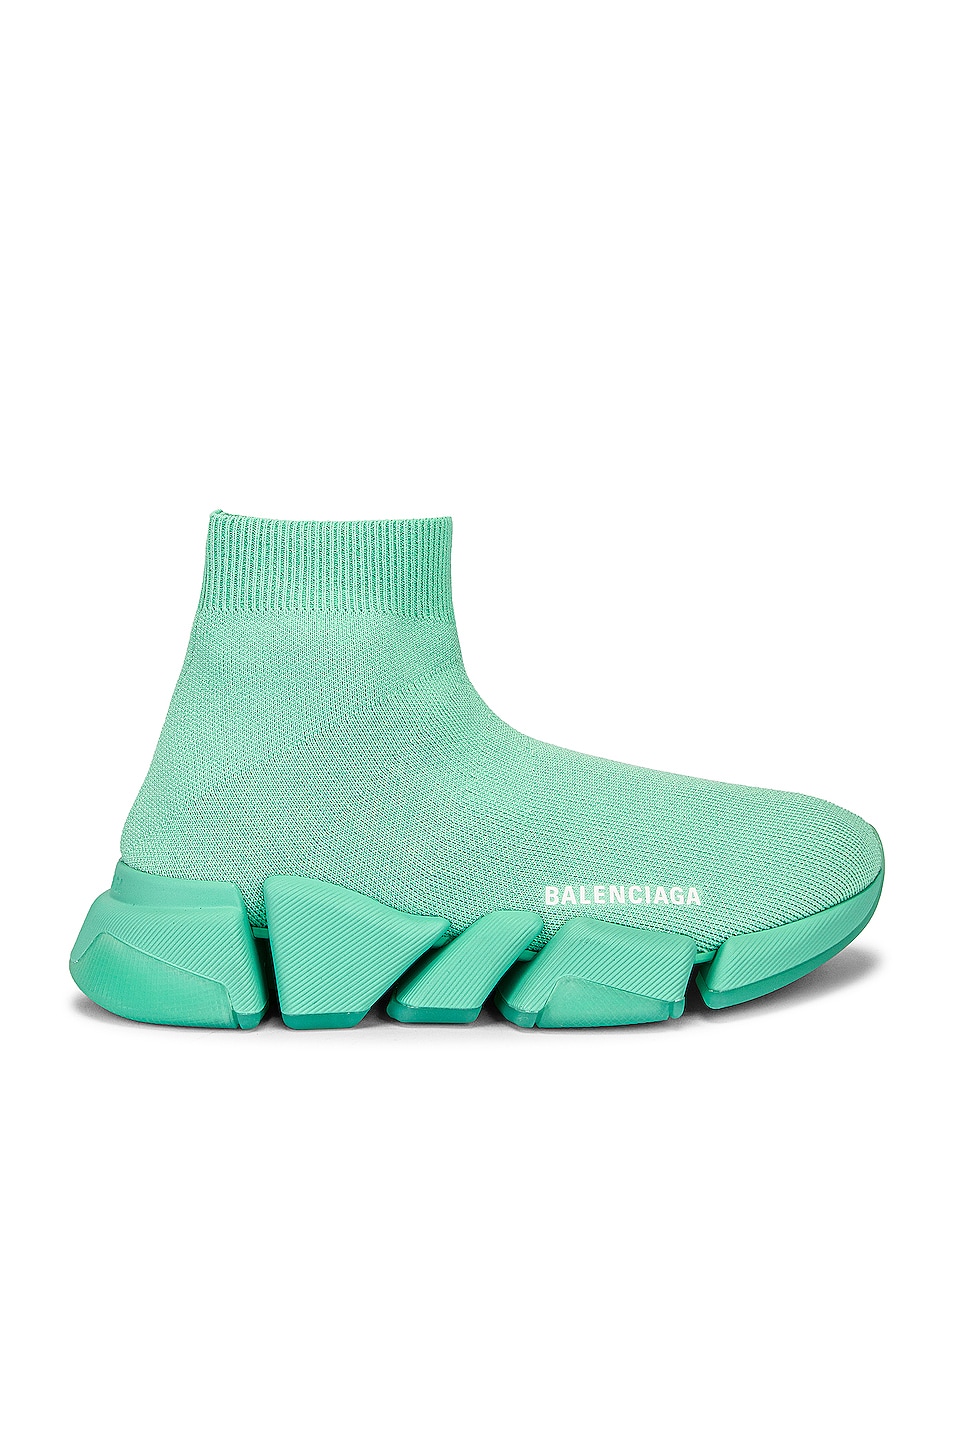 Image 1 of Balenciaga Speed 2.0 LT Sneakers in Mint